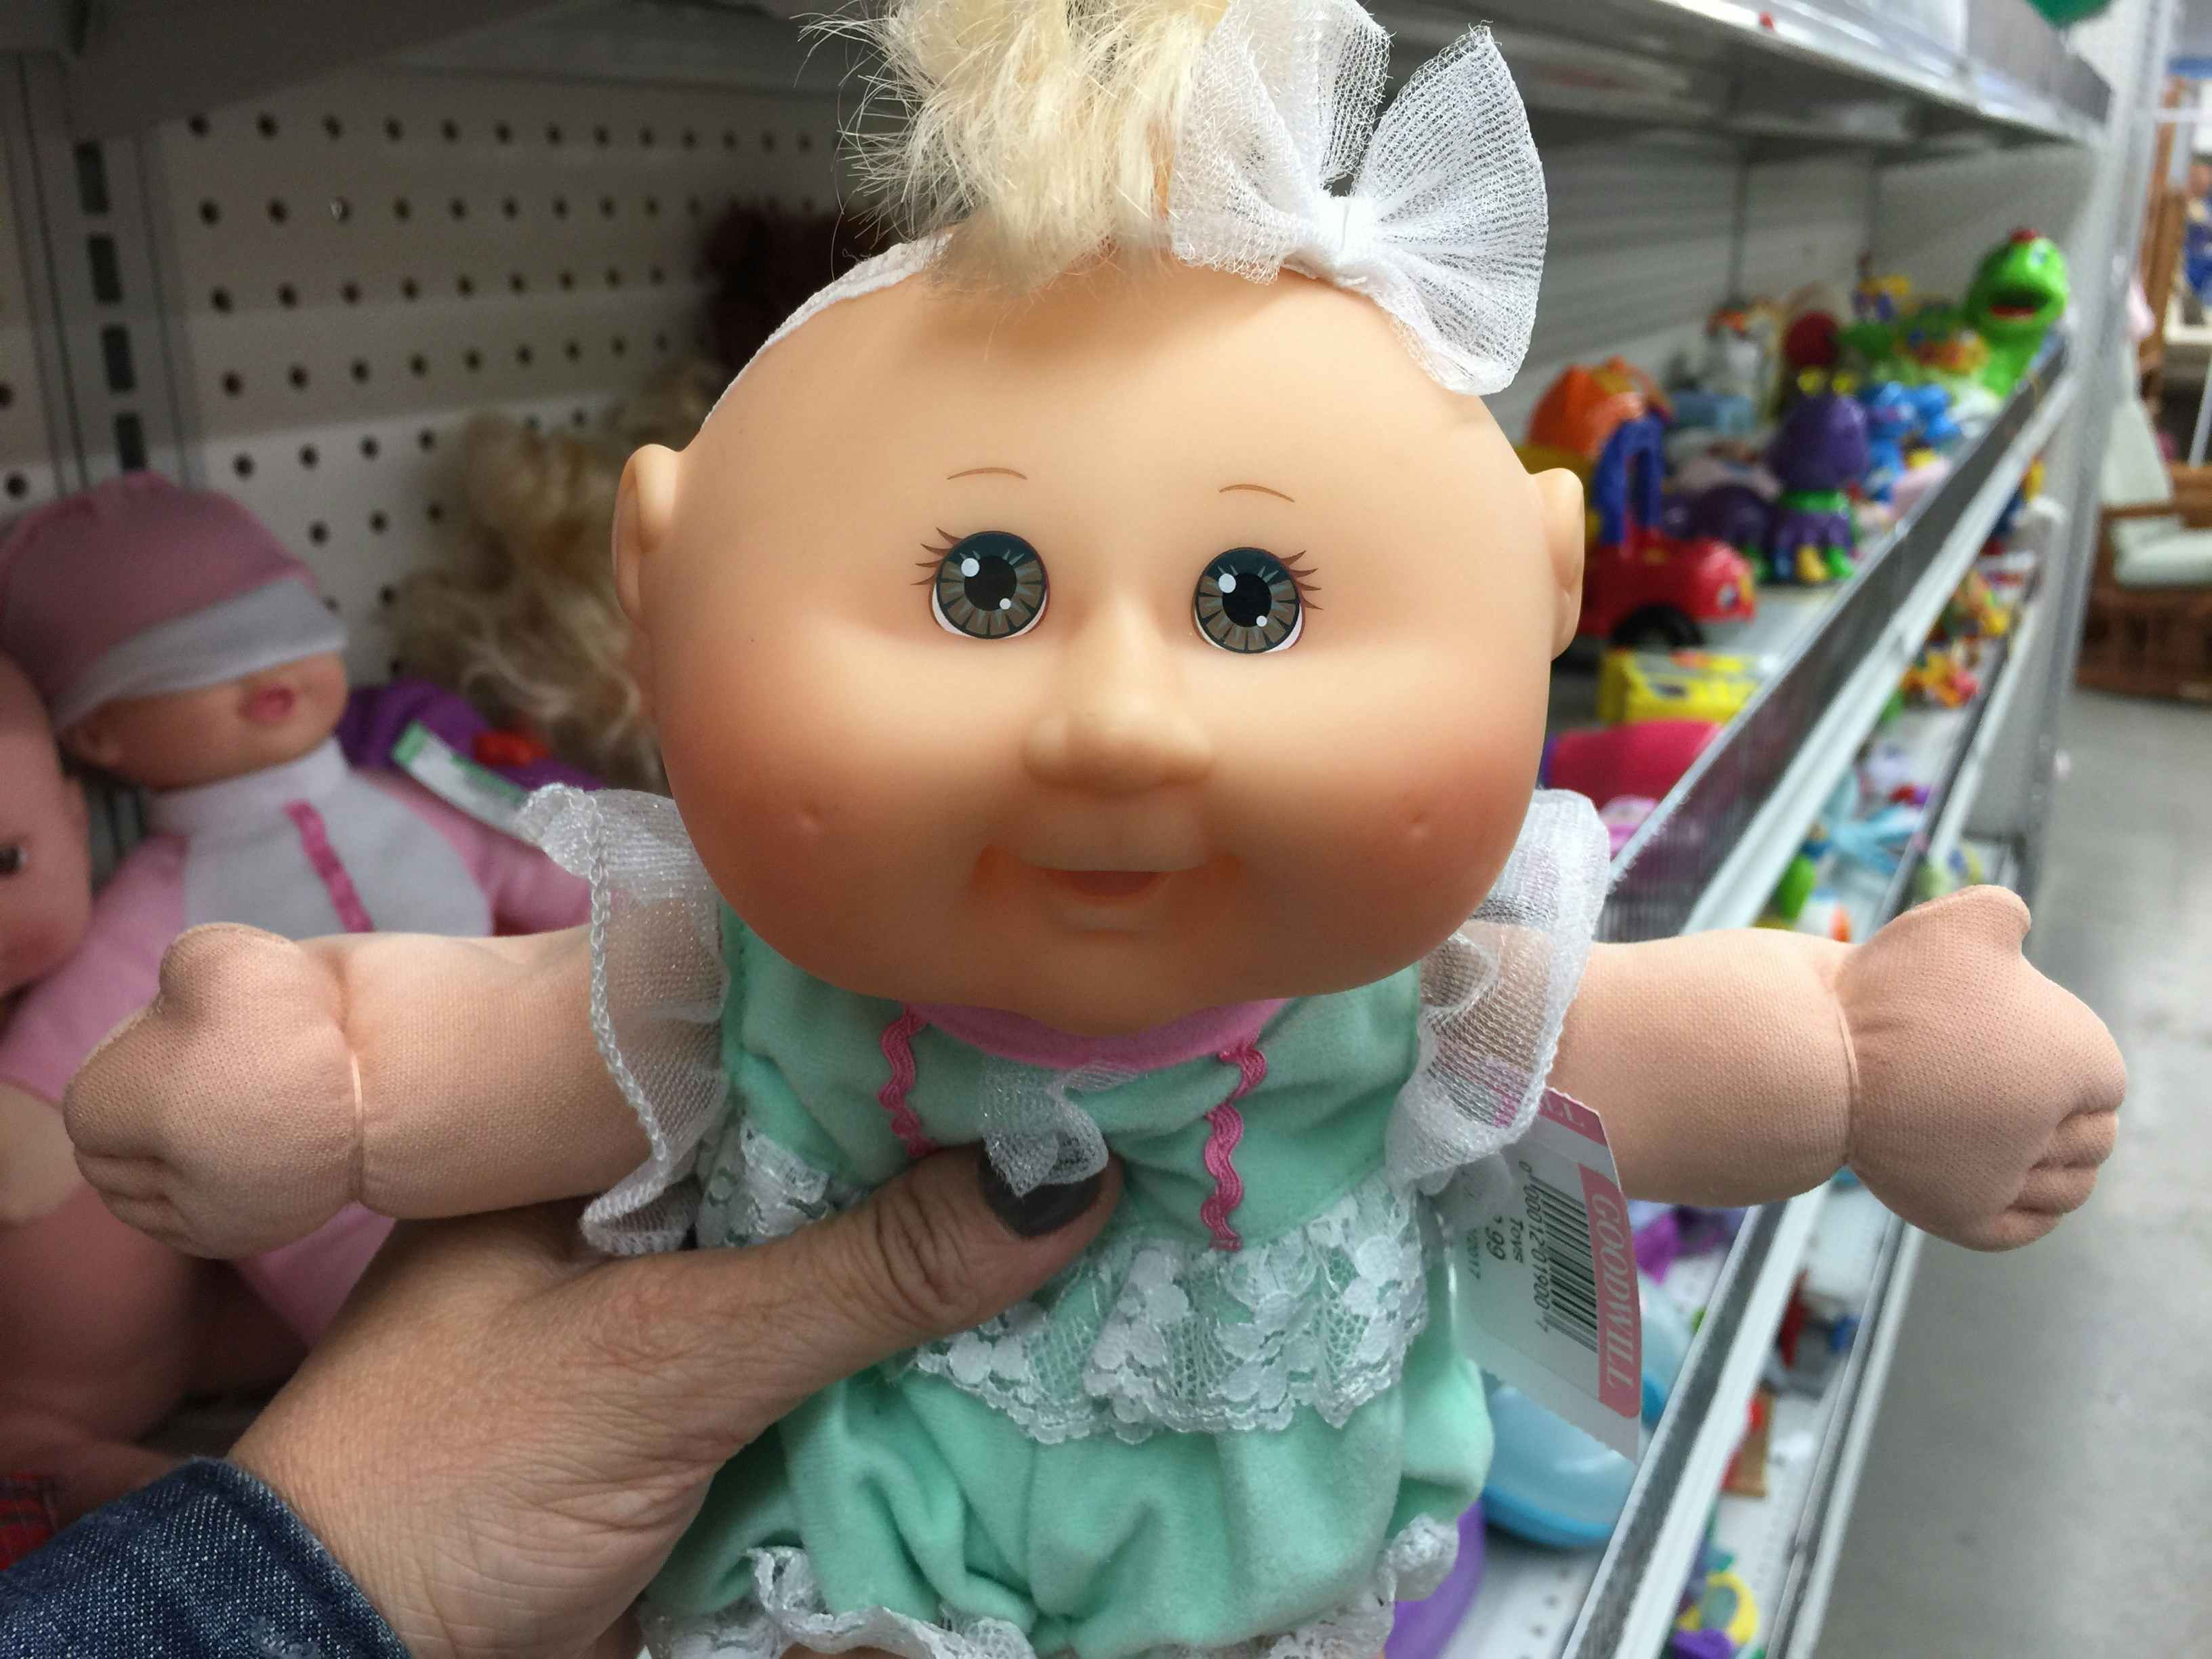 Someone holding up a Cabbage Patch doll in a thrift store